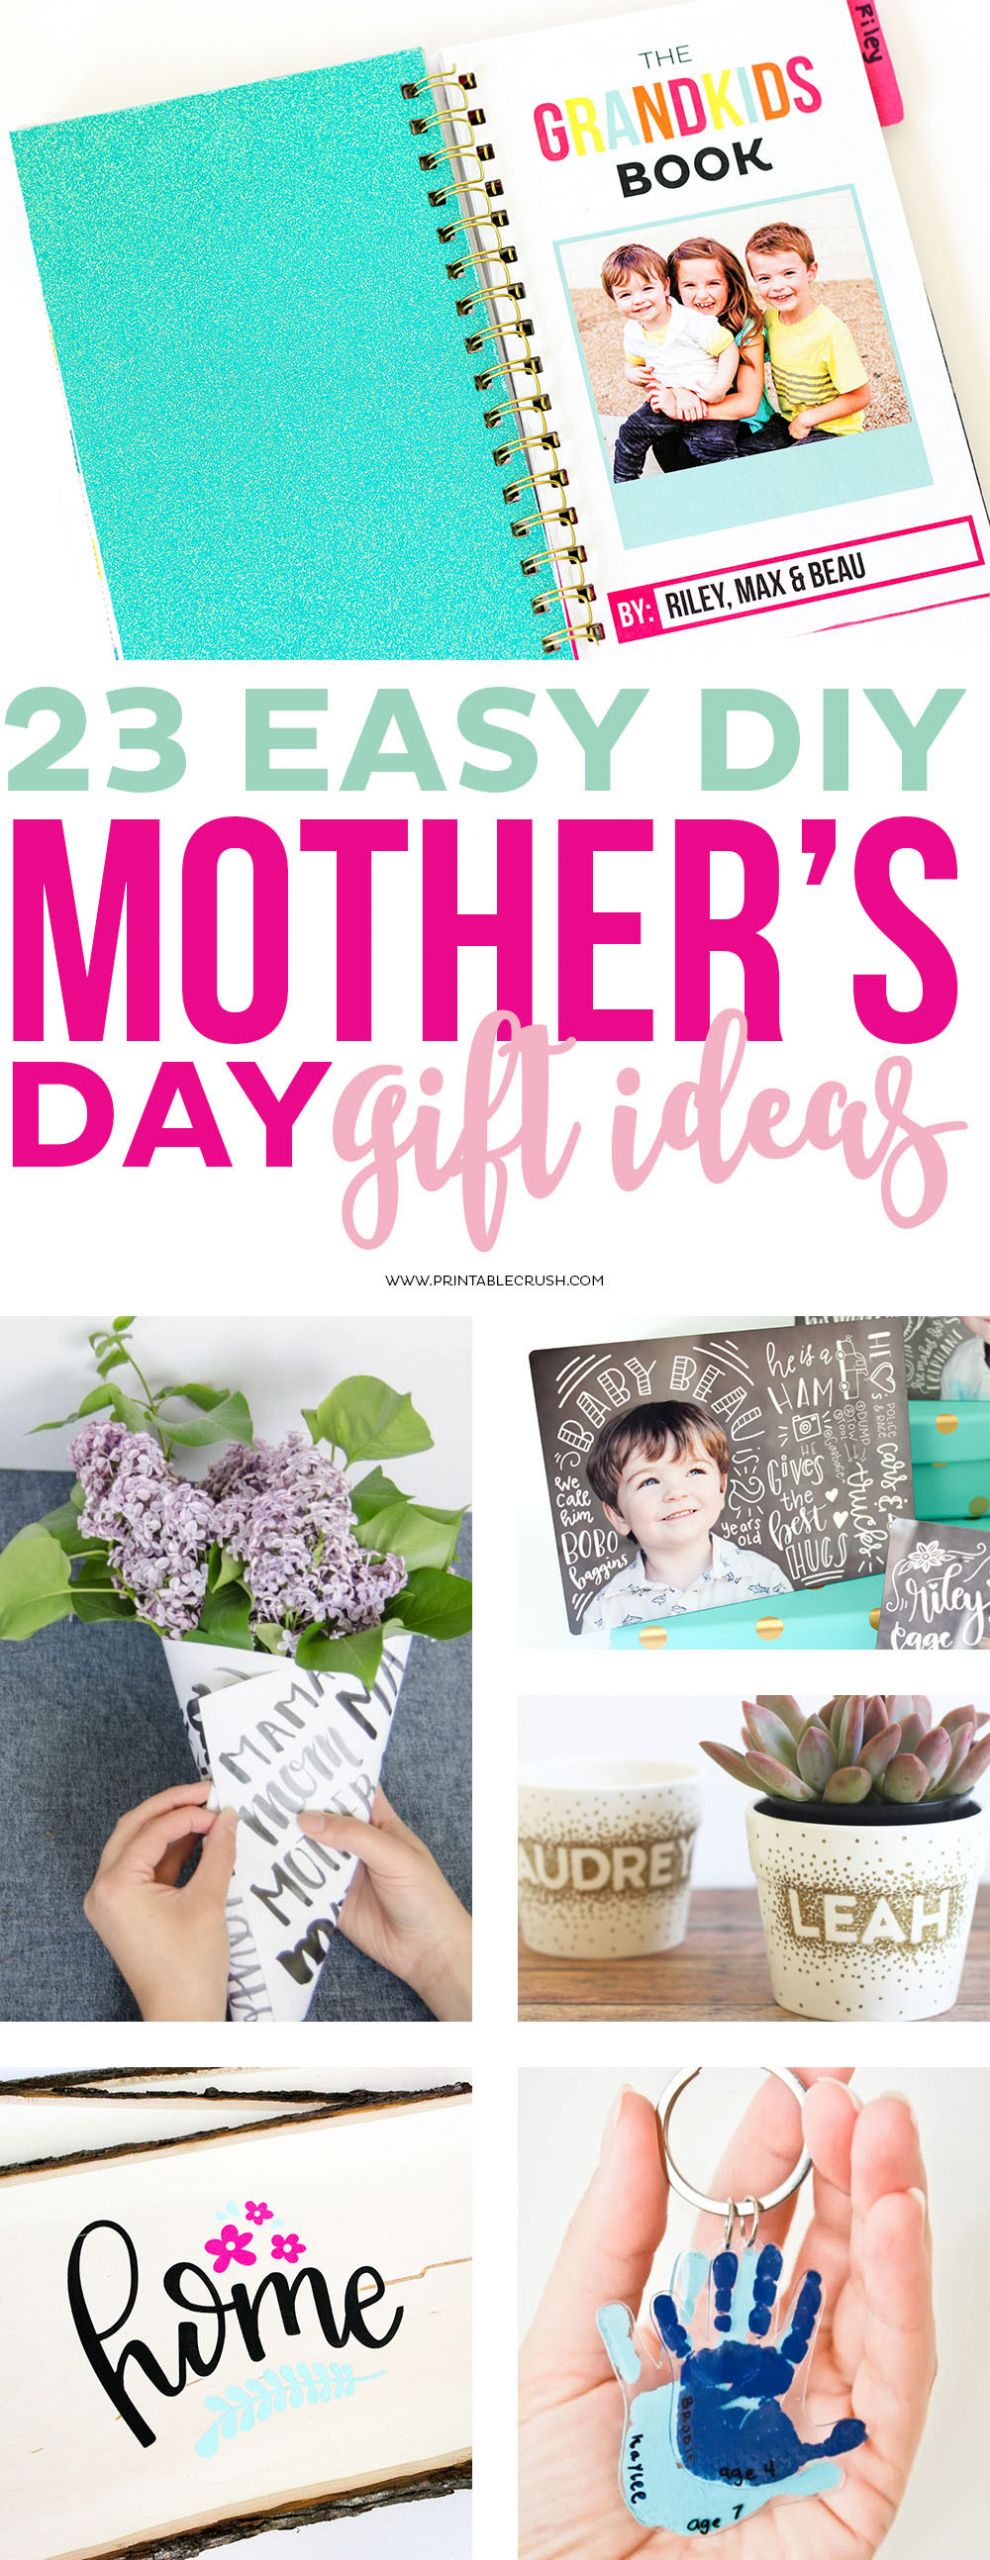 Quick Mothers Day Gifts
 23 Easy DIY Mother s Day Gift Ideas Printable Crush